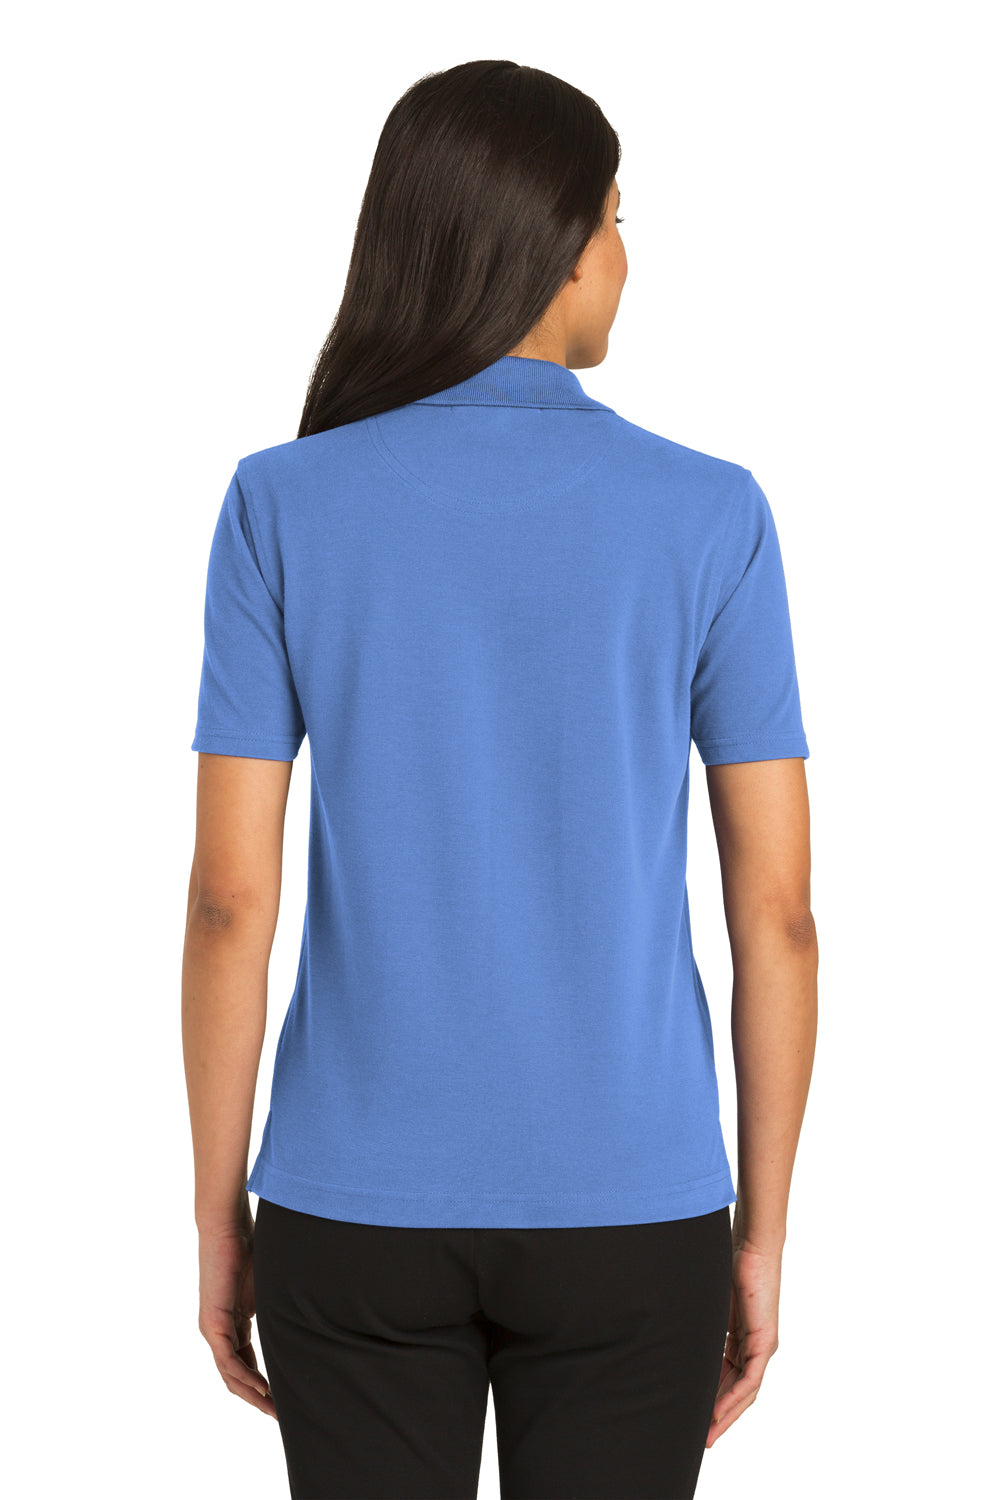 Port Authority L455 Womens Rapid Dry Moisture Wicking Short Sleeve Polo Shirt Riviera Blue Back